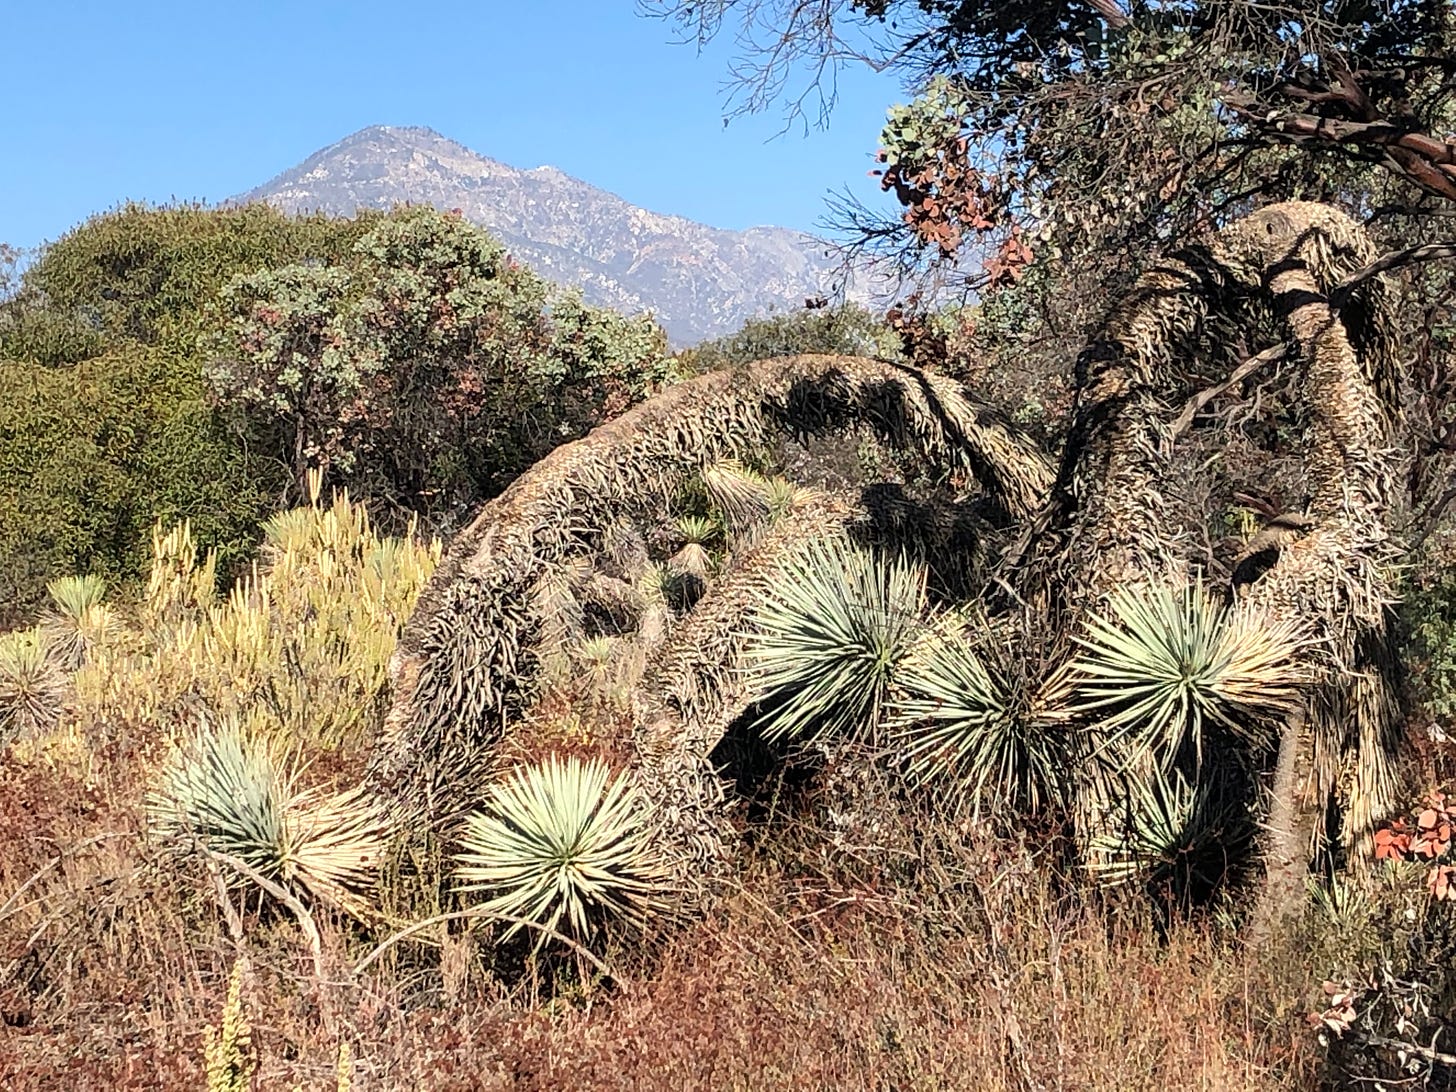 Landscape with Joshua trees which are curving downward to the ground as well as dry grasses and bushes with stark mountains in the background.